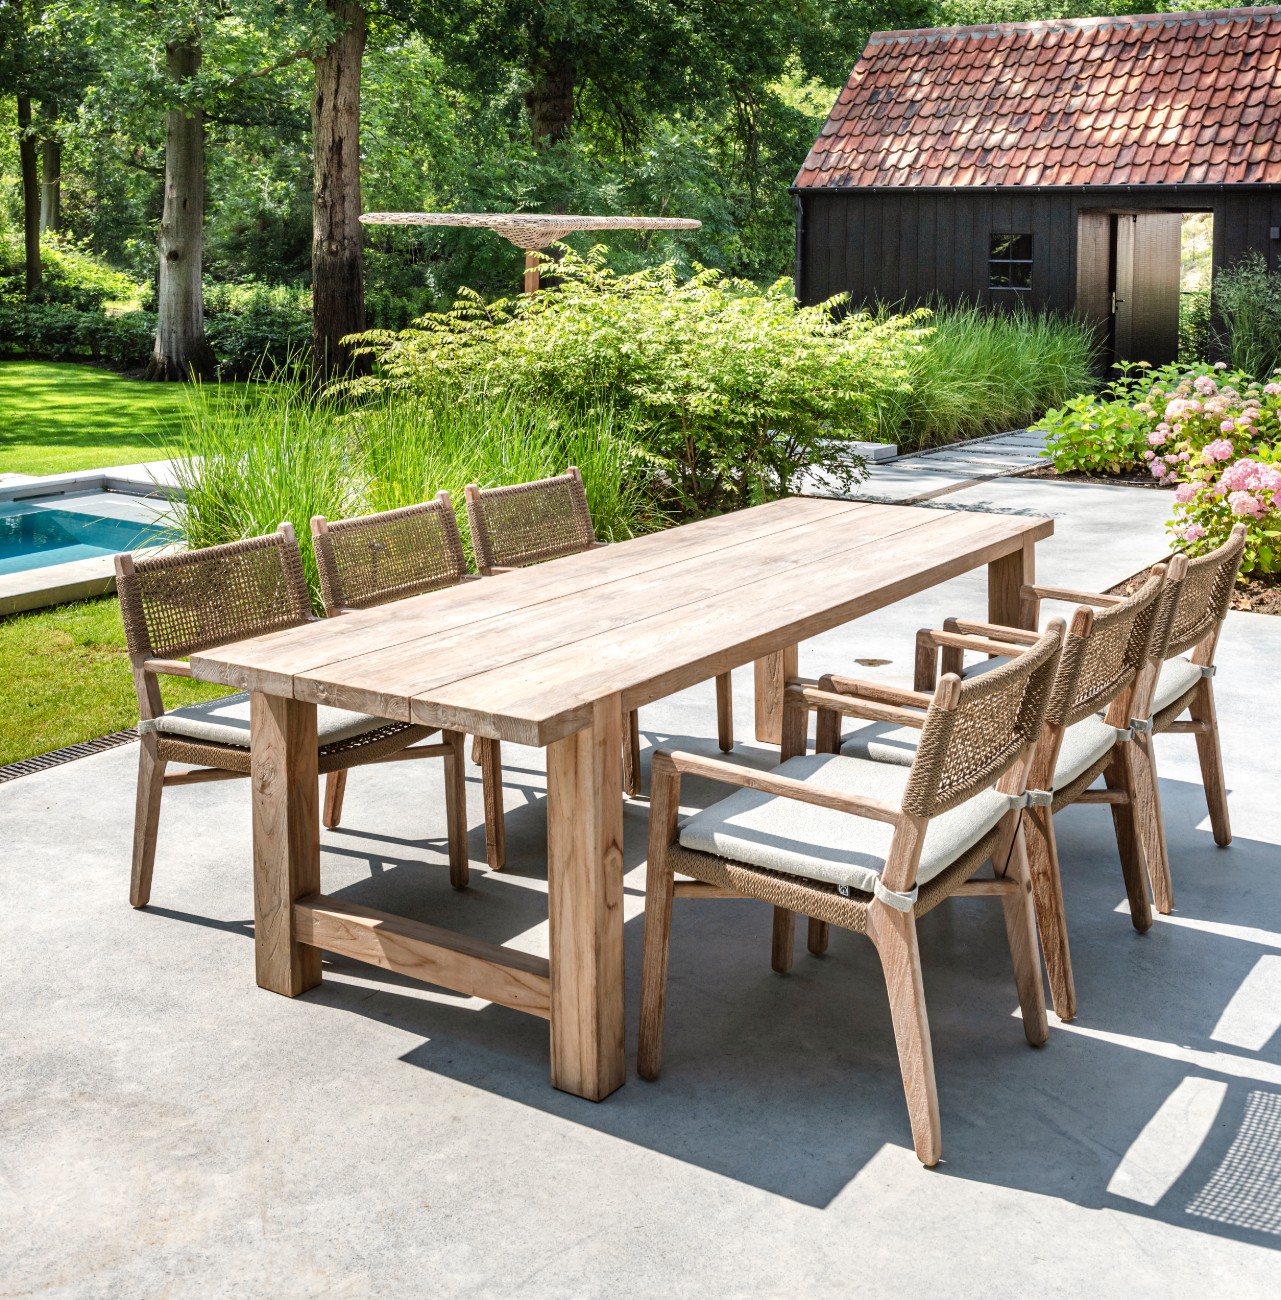 Gommaire 10 Seater Dining Set Jacob Luxury Outdoor Living